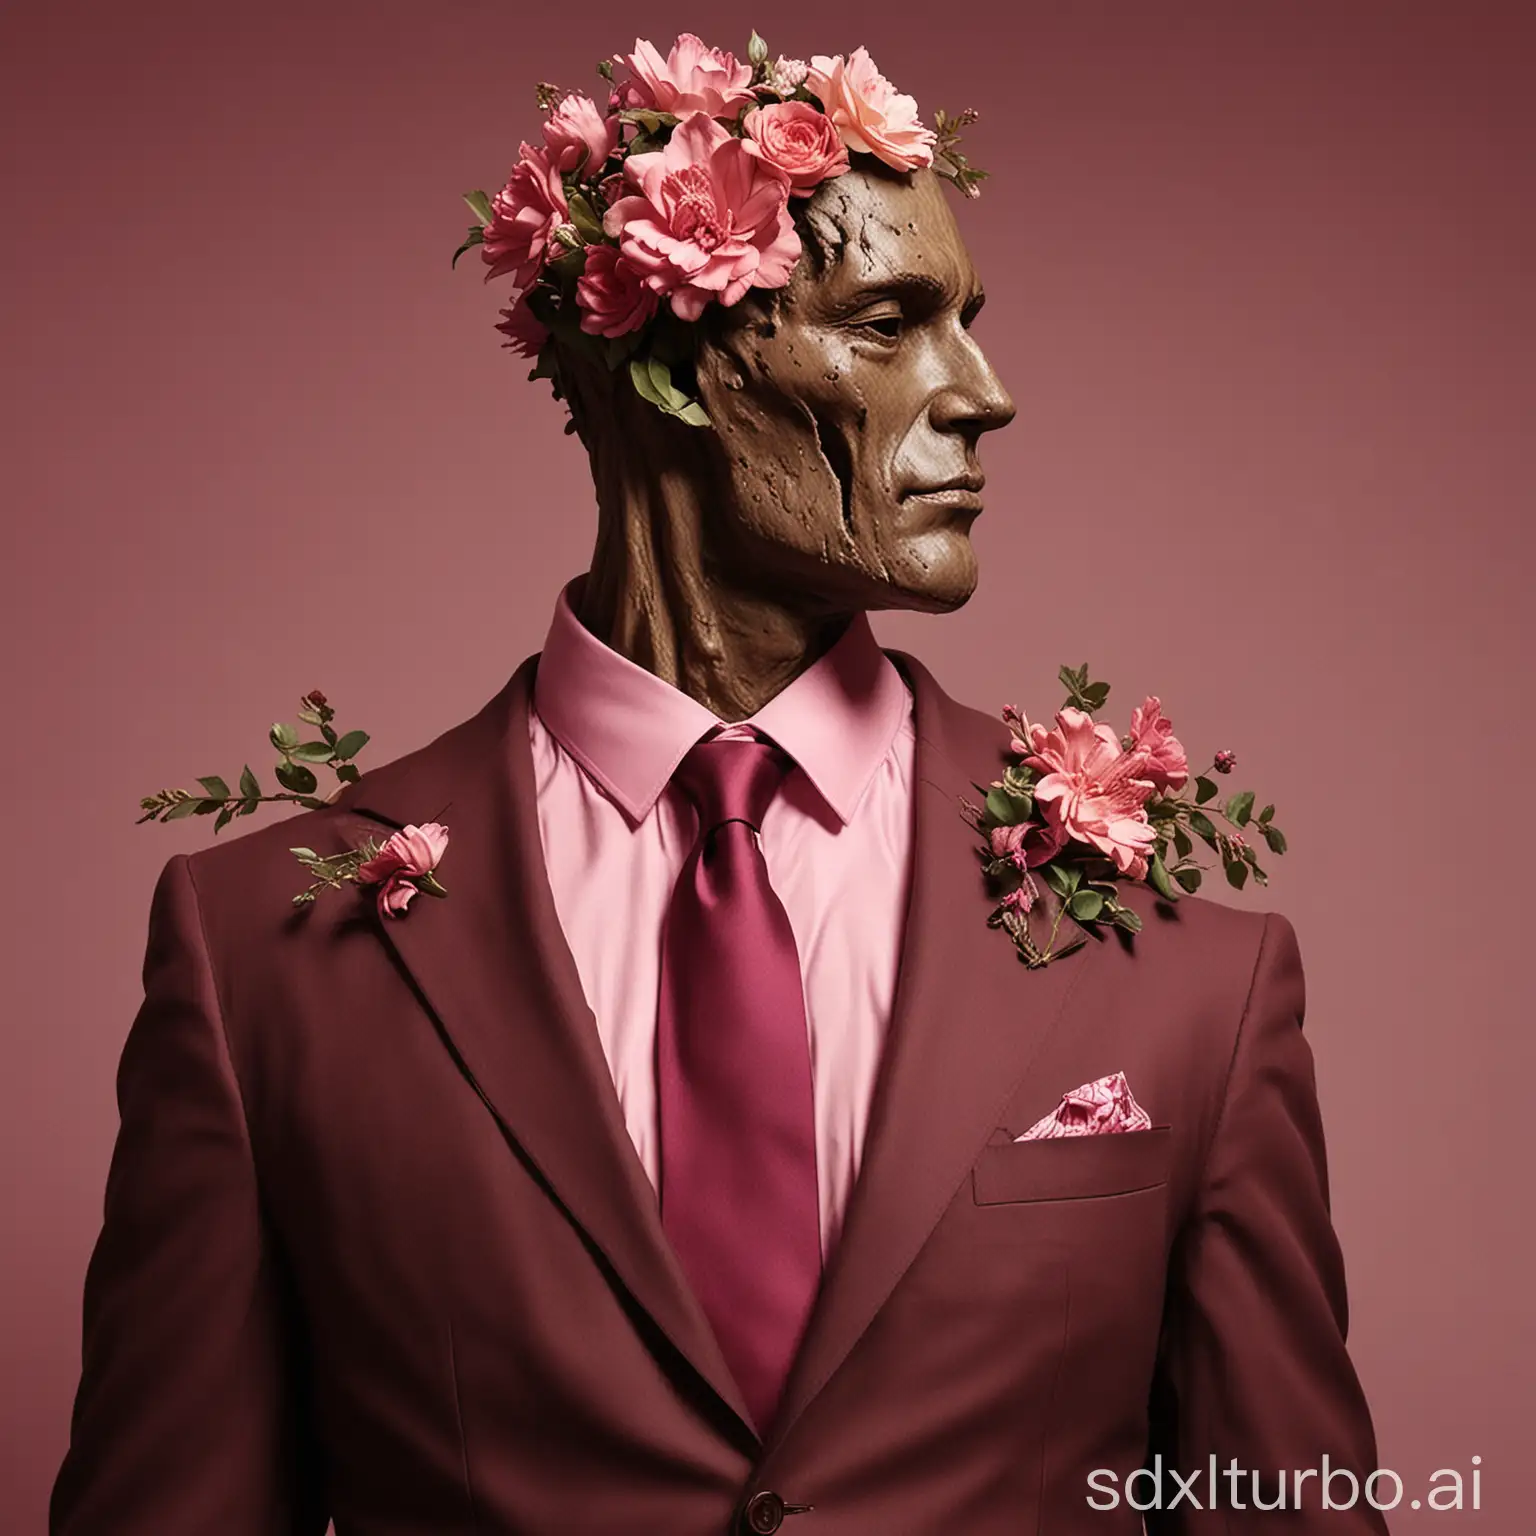 Generate an illustration depicting a headless man wearing a brown suit, with flowers blooming from his neck area upwards to take the place of his head and face. Render the flowers in vibrant pink hues against the dark brown suit. Maintain the vintage, slightly abstracted artistic style seen in the reference image to capture that nostalgic aesthetic. Render details of the man's suit and pink tie clearly while focusing rendering of the unique floral head features. Place the suited figure against a deep maroon backdrop for contrast and to complement the floral elements.